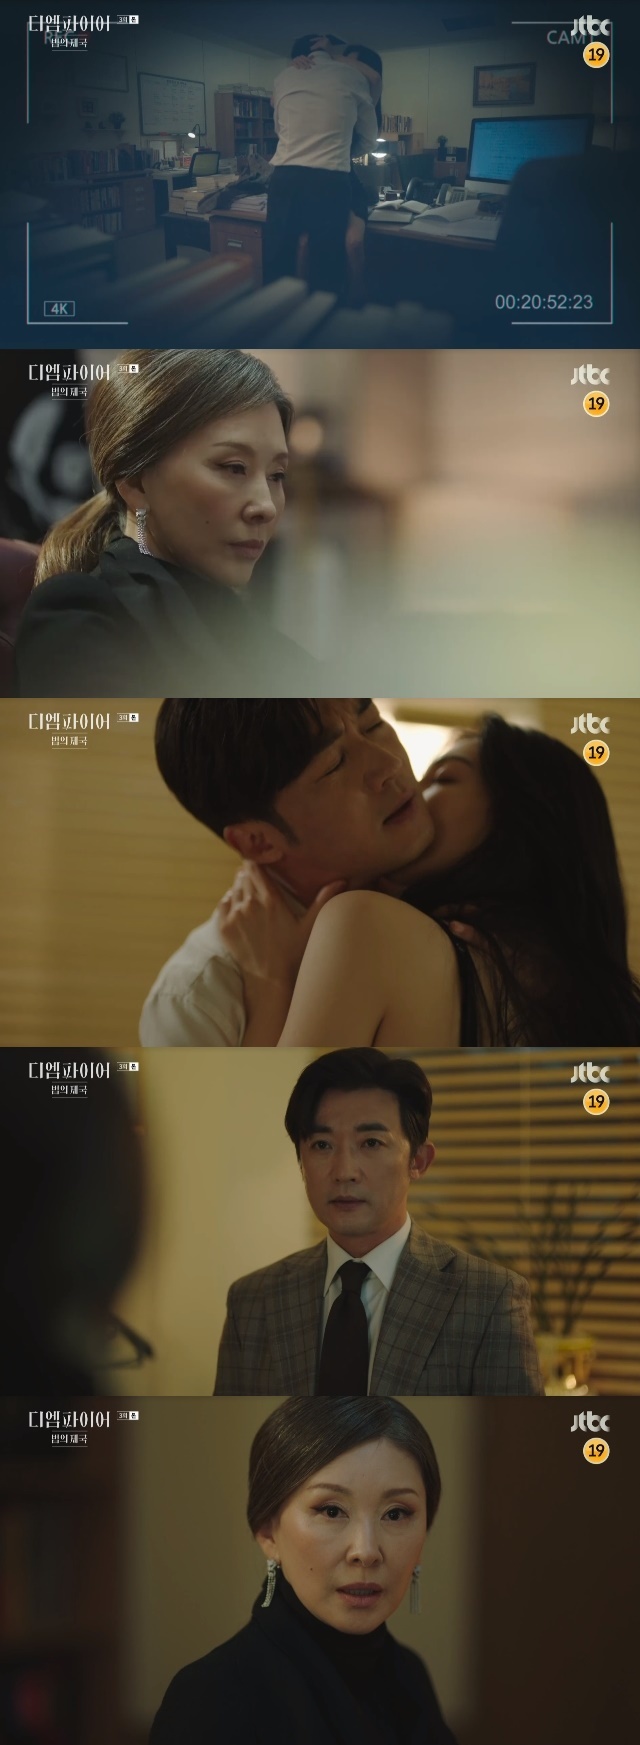 Lee Mi-sook handed Warning to son-in-law Ahn Jae-wook who committed AffairIn the third episode of the JTBC Saturday drama The Empire of Law (played by Oh Ga-gyu and directed by Yoo Hyun-ki), which aired on October 1, he threw a Warning to his son-in-law, Na Geun-woo (played by Lee Mi-sook), who is cheating on him.On this day, Ham Kwang-jeon secretly looked at the deep affection of Na Geun-woo and Hong Nan-hee in the professors office and called Na Geun-woo on the extension phone.Hong Nan-hee told me not to answer the phone, but Na Geun-woo finally picked up the phone and pushed Hong Nan-hee, who was still kissing his neck, knowing that the opponent in the phone was a haemgwangjeon.Ham Kwang-jeon asked, Do you have Alone?So Na Geun-woo shamelessly lied, I have your Alone, and Ham Kwang-jeon said, I have a lesson guide and I will bring it.Why are you so surprised? Is there a reason I should not go? Na Geun-woo said, I can go, but he said he would come.